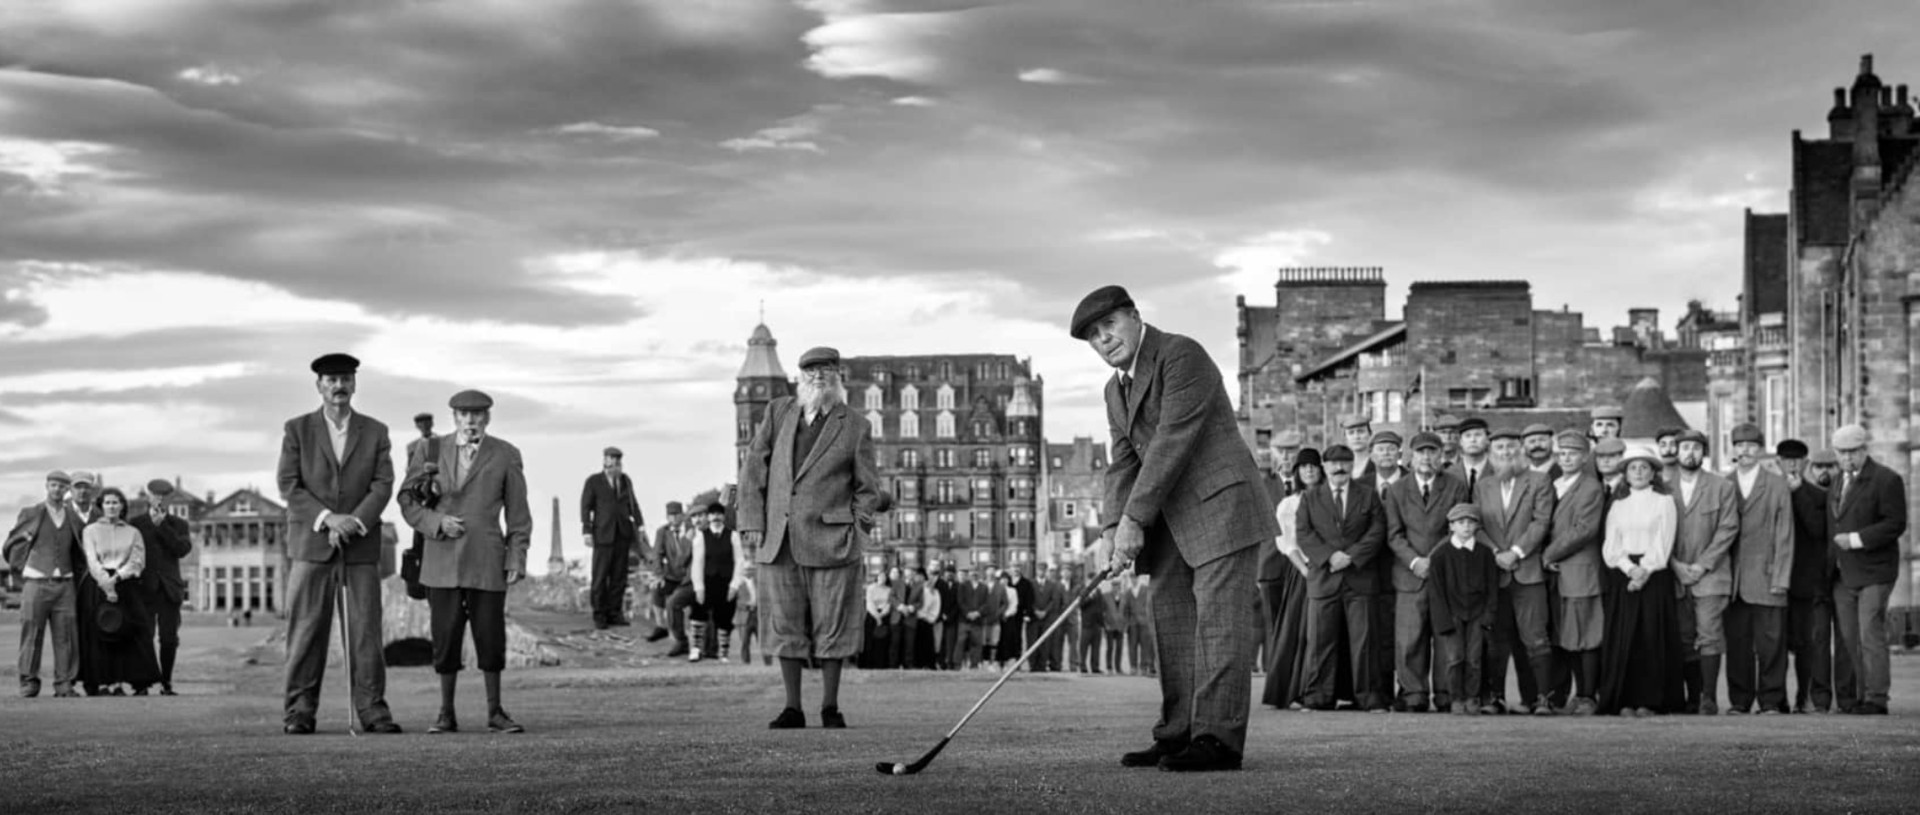 Home of Golf (Commemorative Edition Signed by Gary Player) by David Yarrow